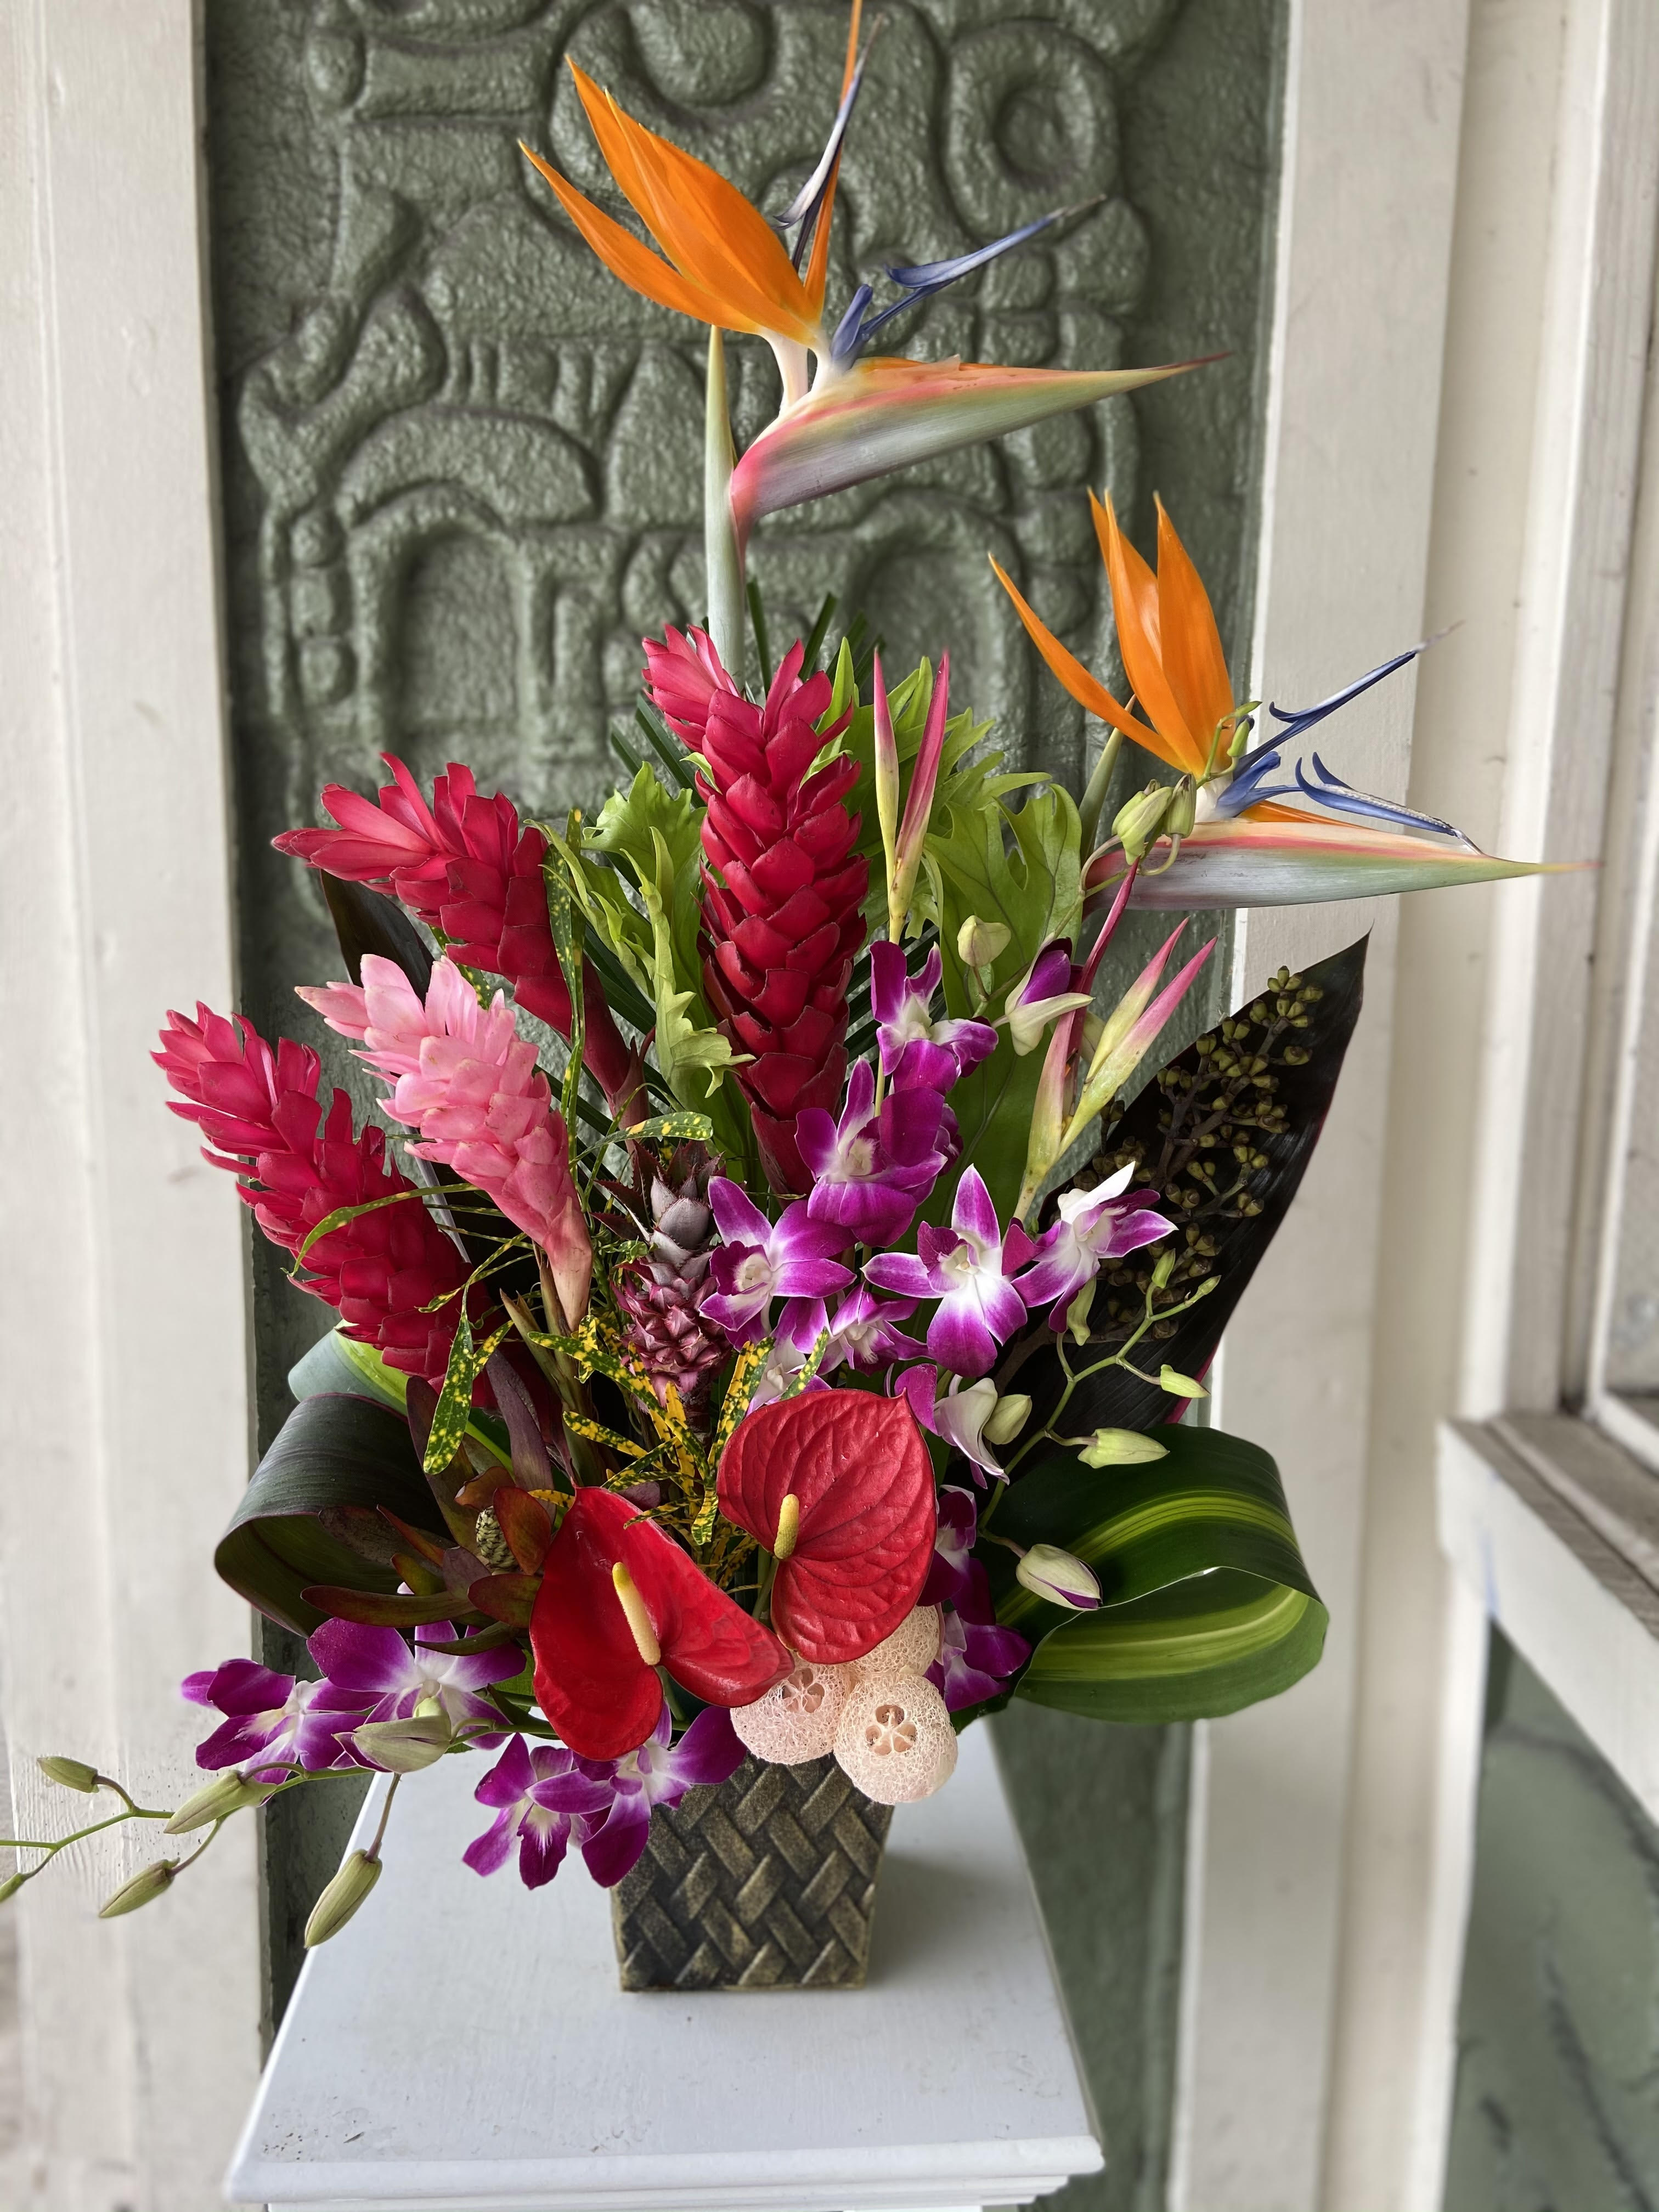 Tropical Design by Toshis in San Jose, CA | Toshi's Flowers & Gifts